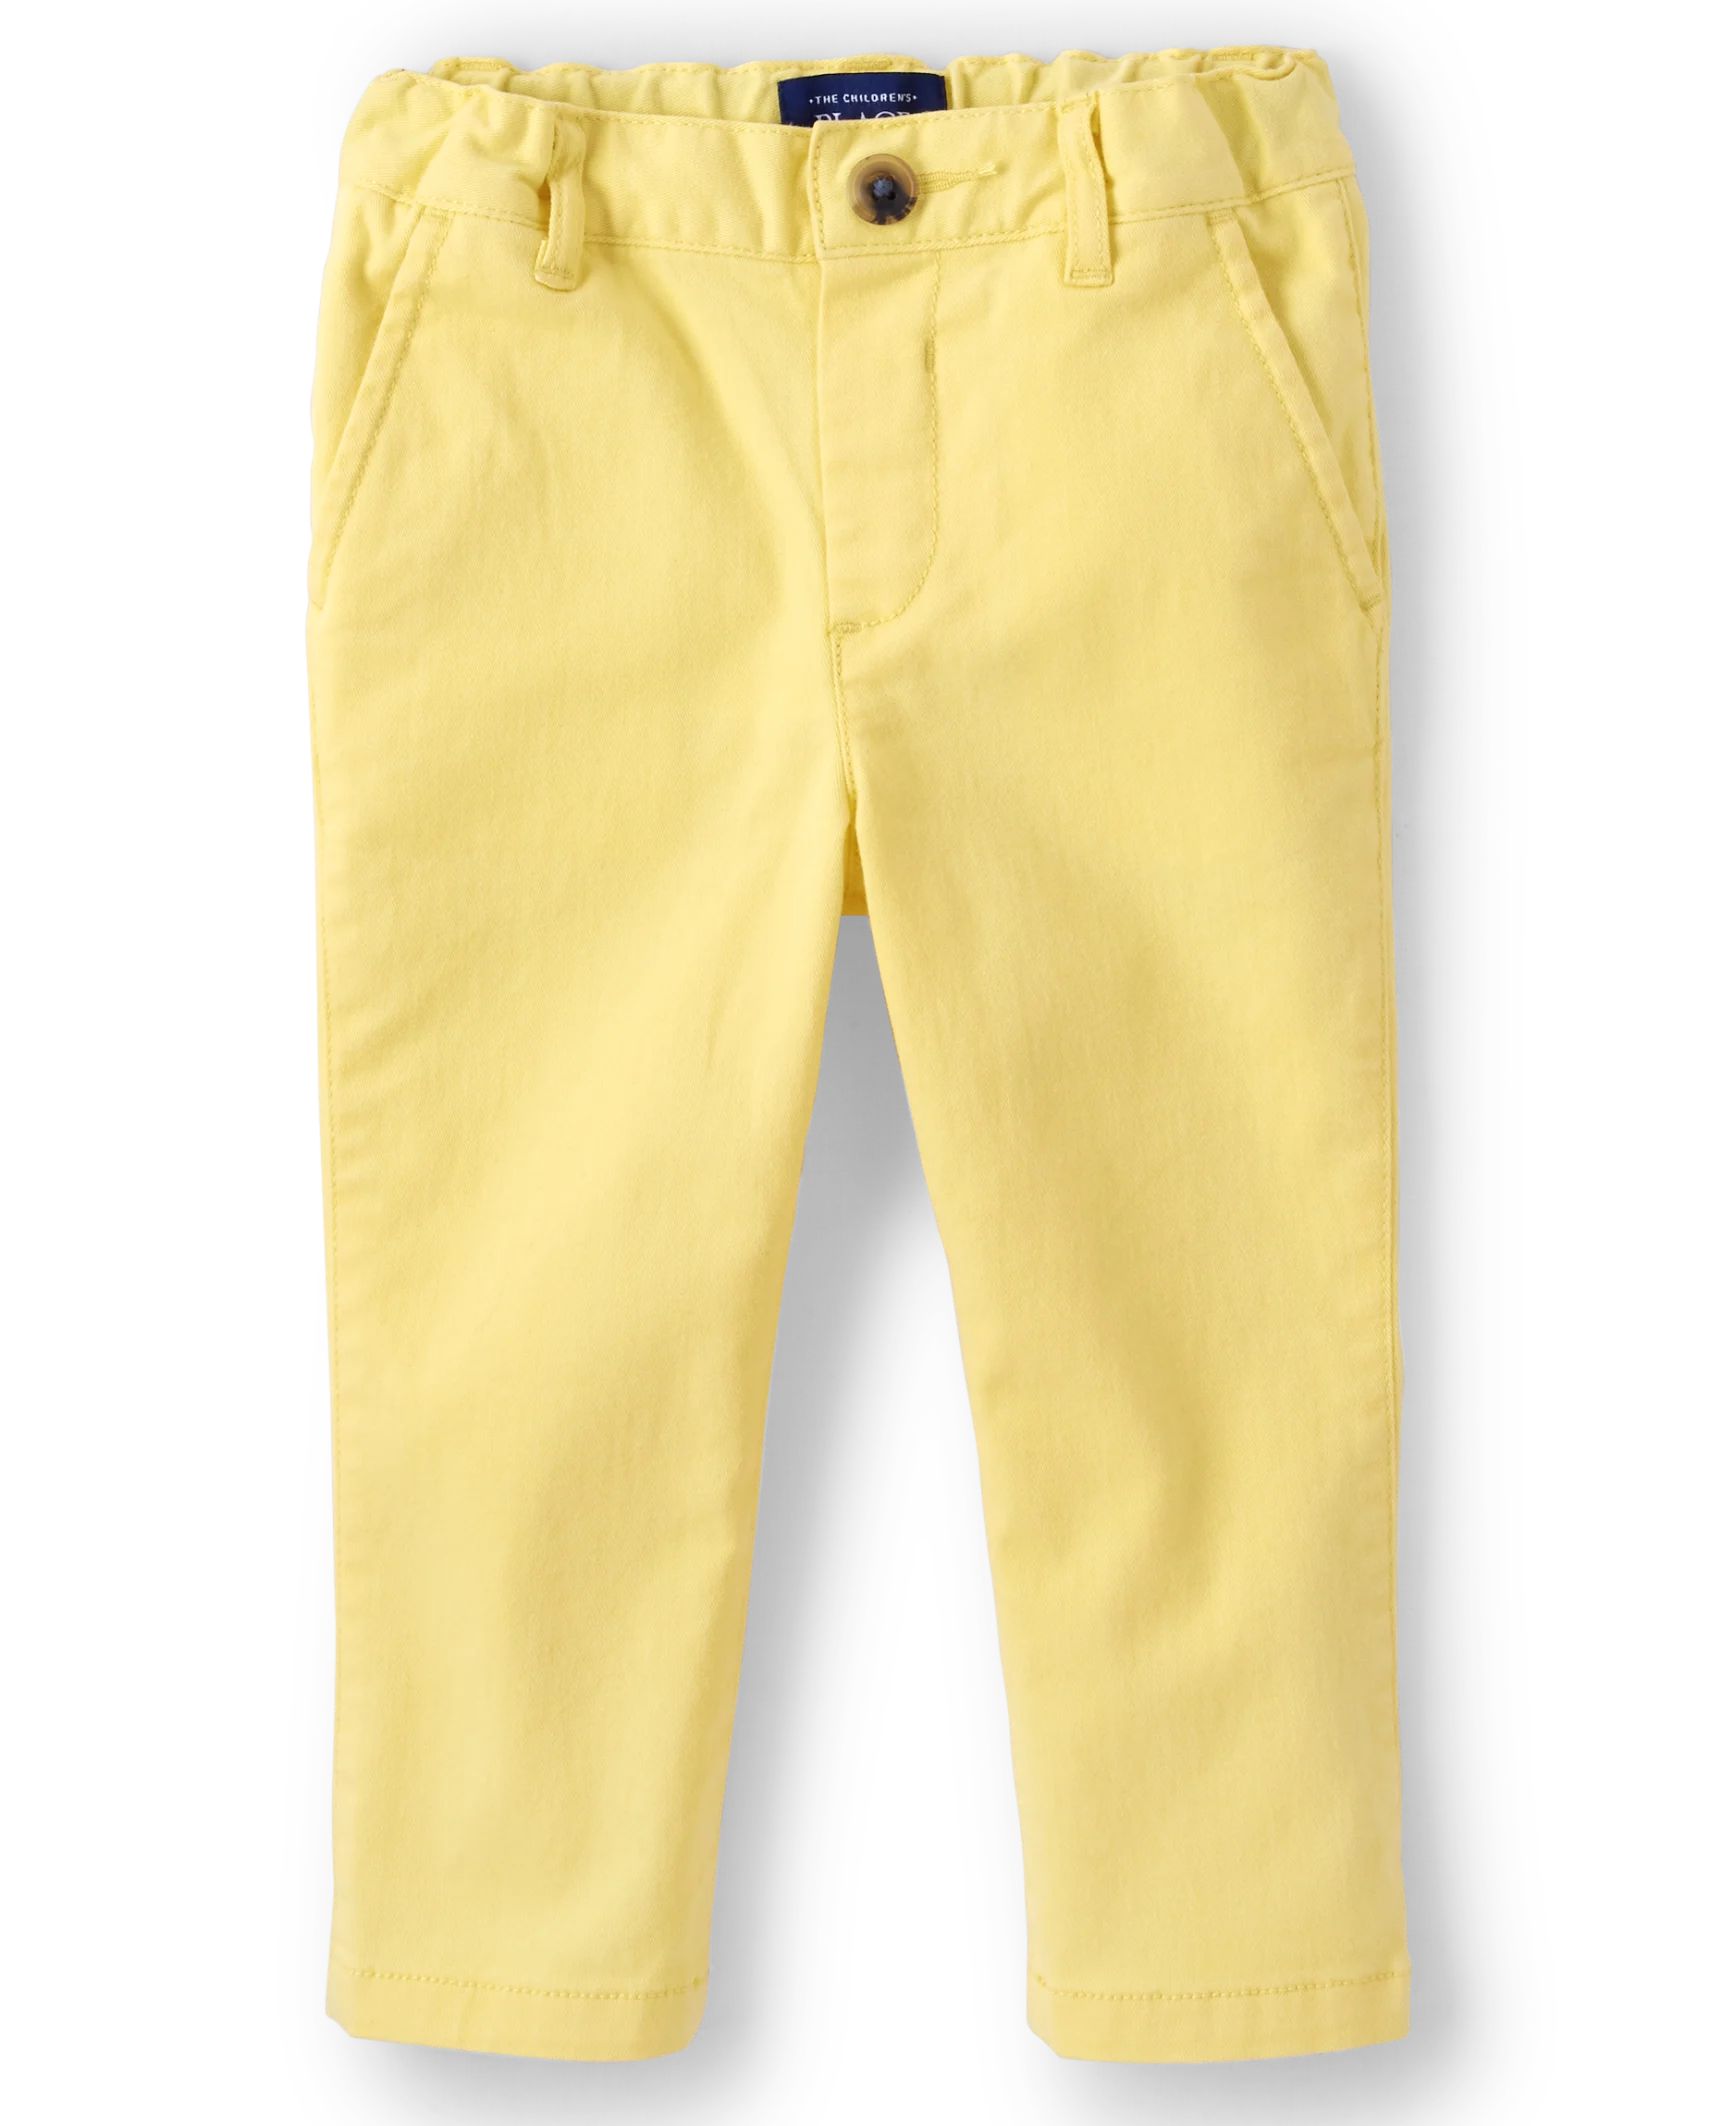 Baby And Toddler Boys Stretch Skinny Chino Pants - sun valley | The Children's Place